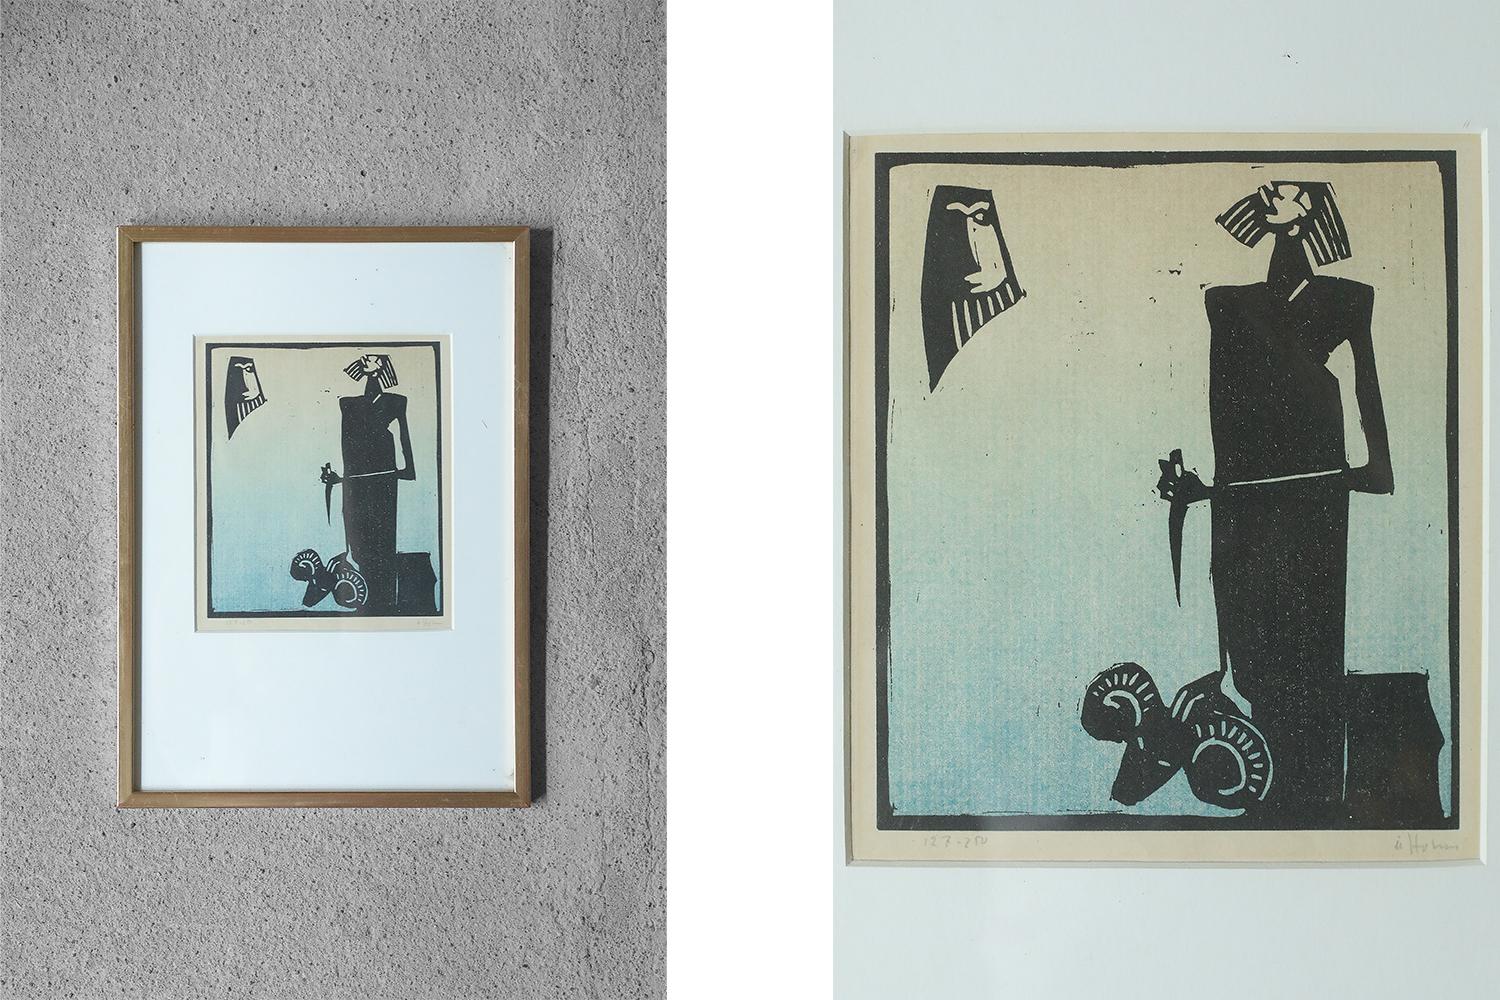 Åke Holm, Bible motif, 1970s
Linocut
Number 127/250
The work is signed by the artist and individually numbered (pencil)
Work dimensions 41/29
Framed work

Åke Holm (1900-1980) was an artist and ceramicist living in Hoganas, Sweden. In his works, he